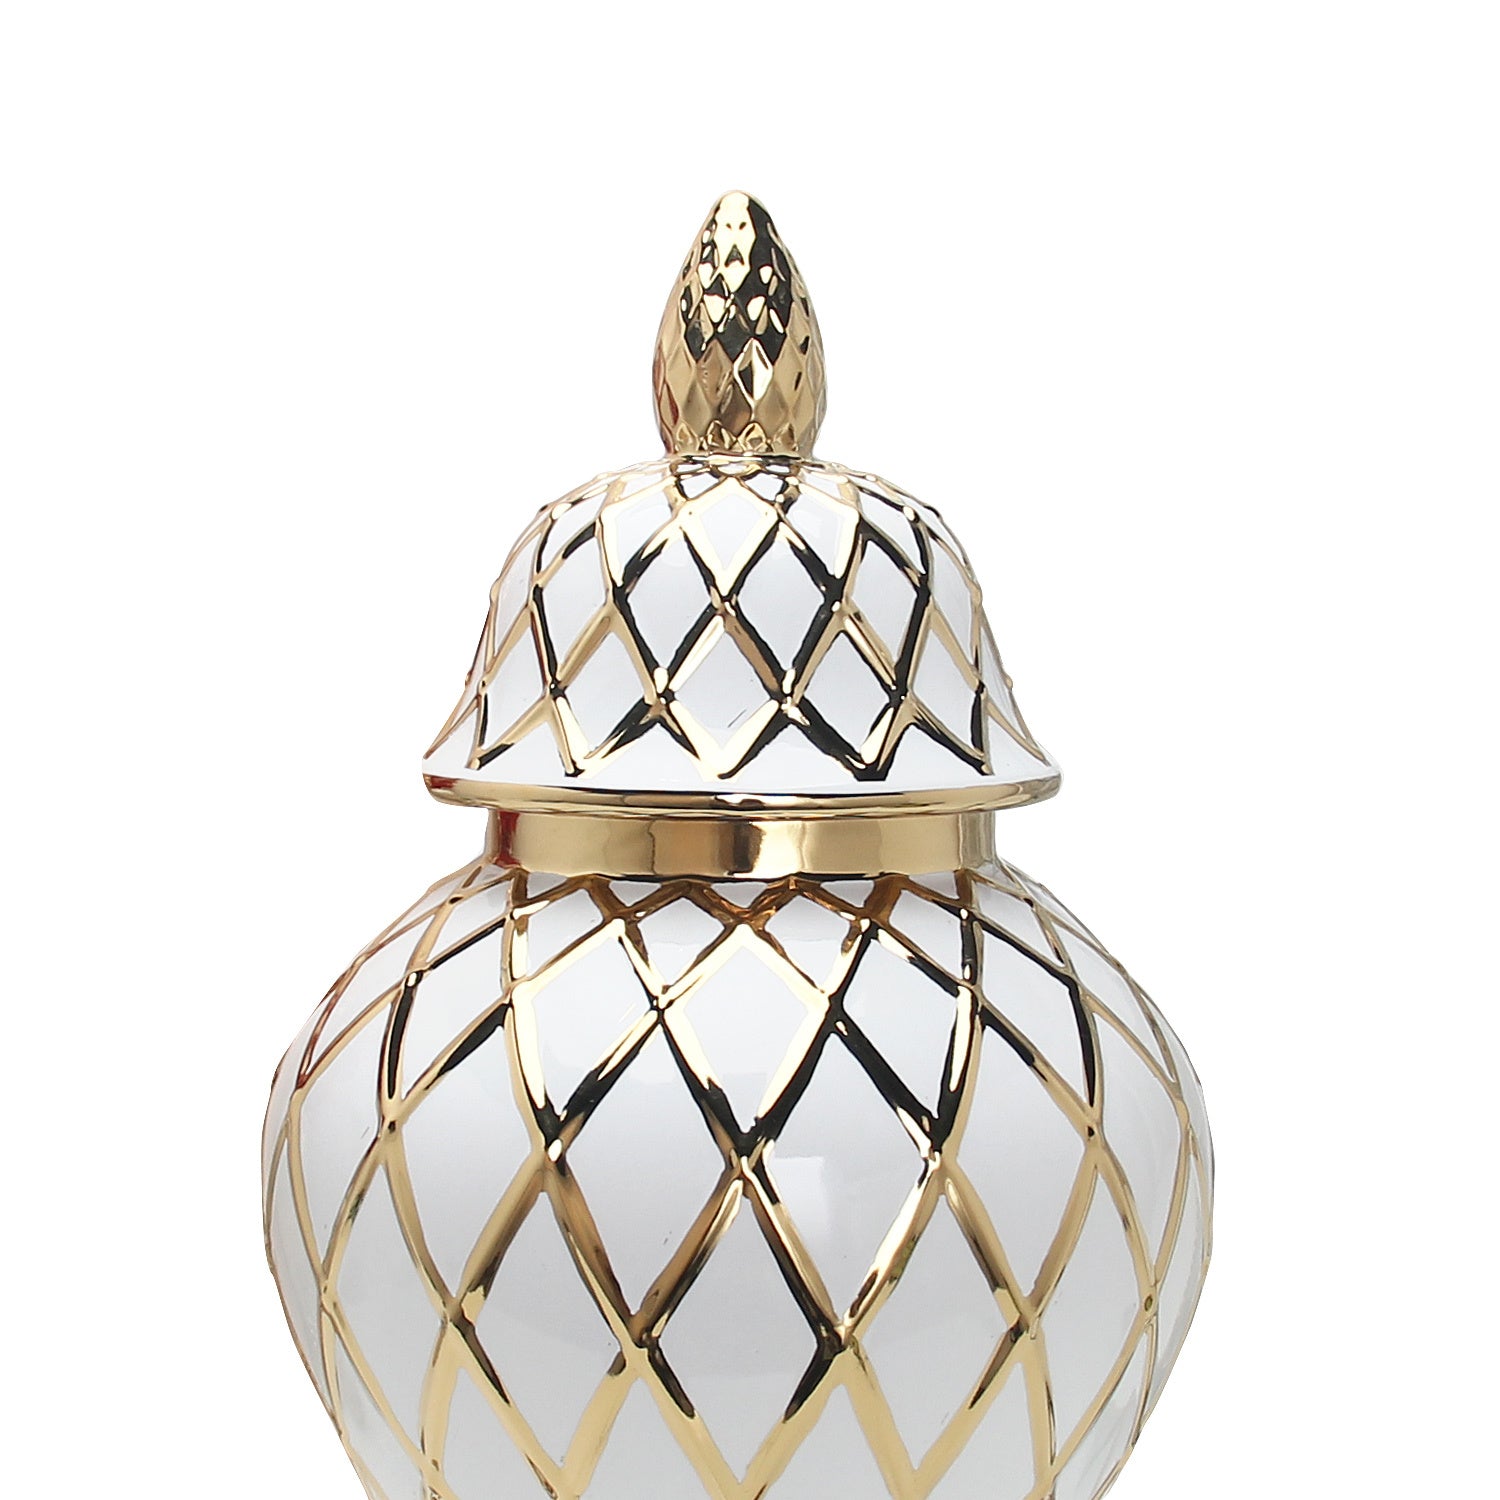 A White and Gold Ceramic Decorative Ginger Jar Vase with gold embellishments, displayed on a white background.